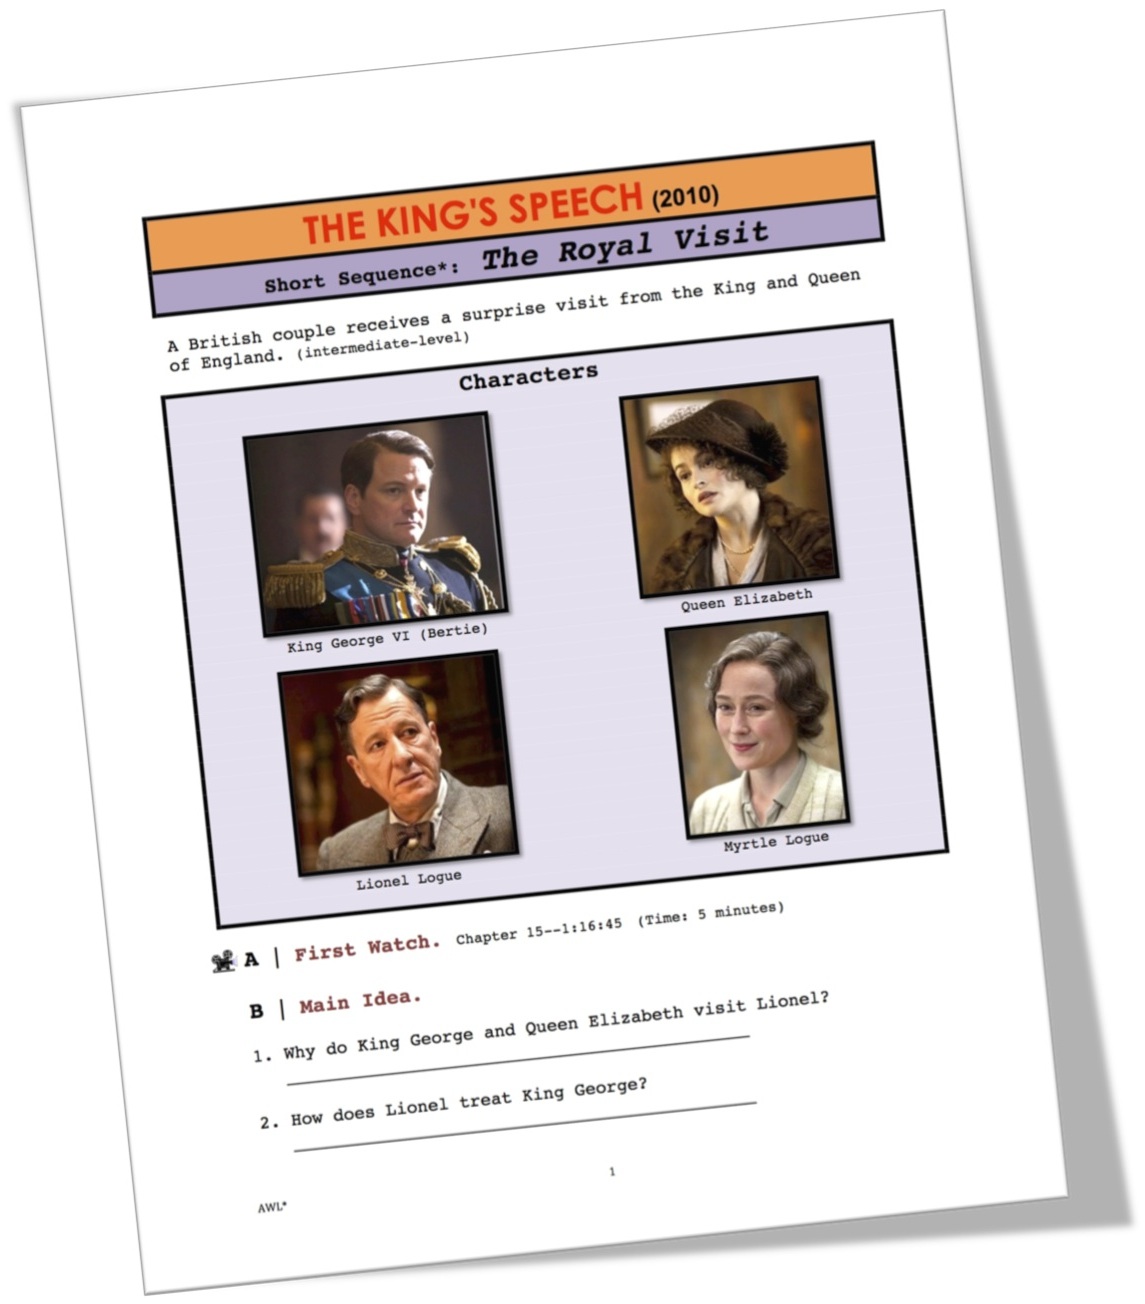 The King's Speech, Royal Visit Short-Sequence ESL Movie Lesson, Page 1